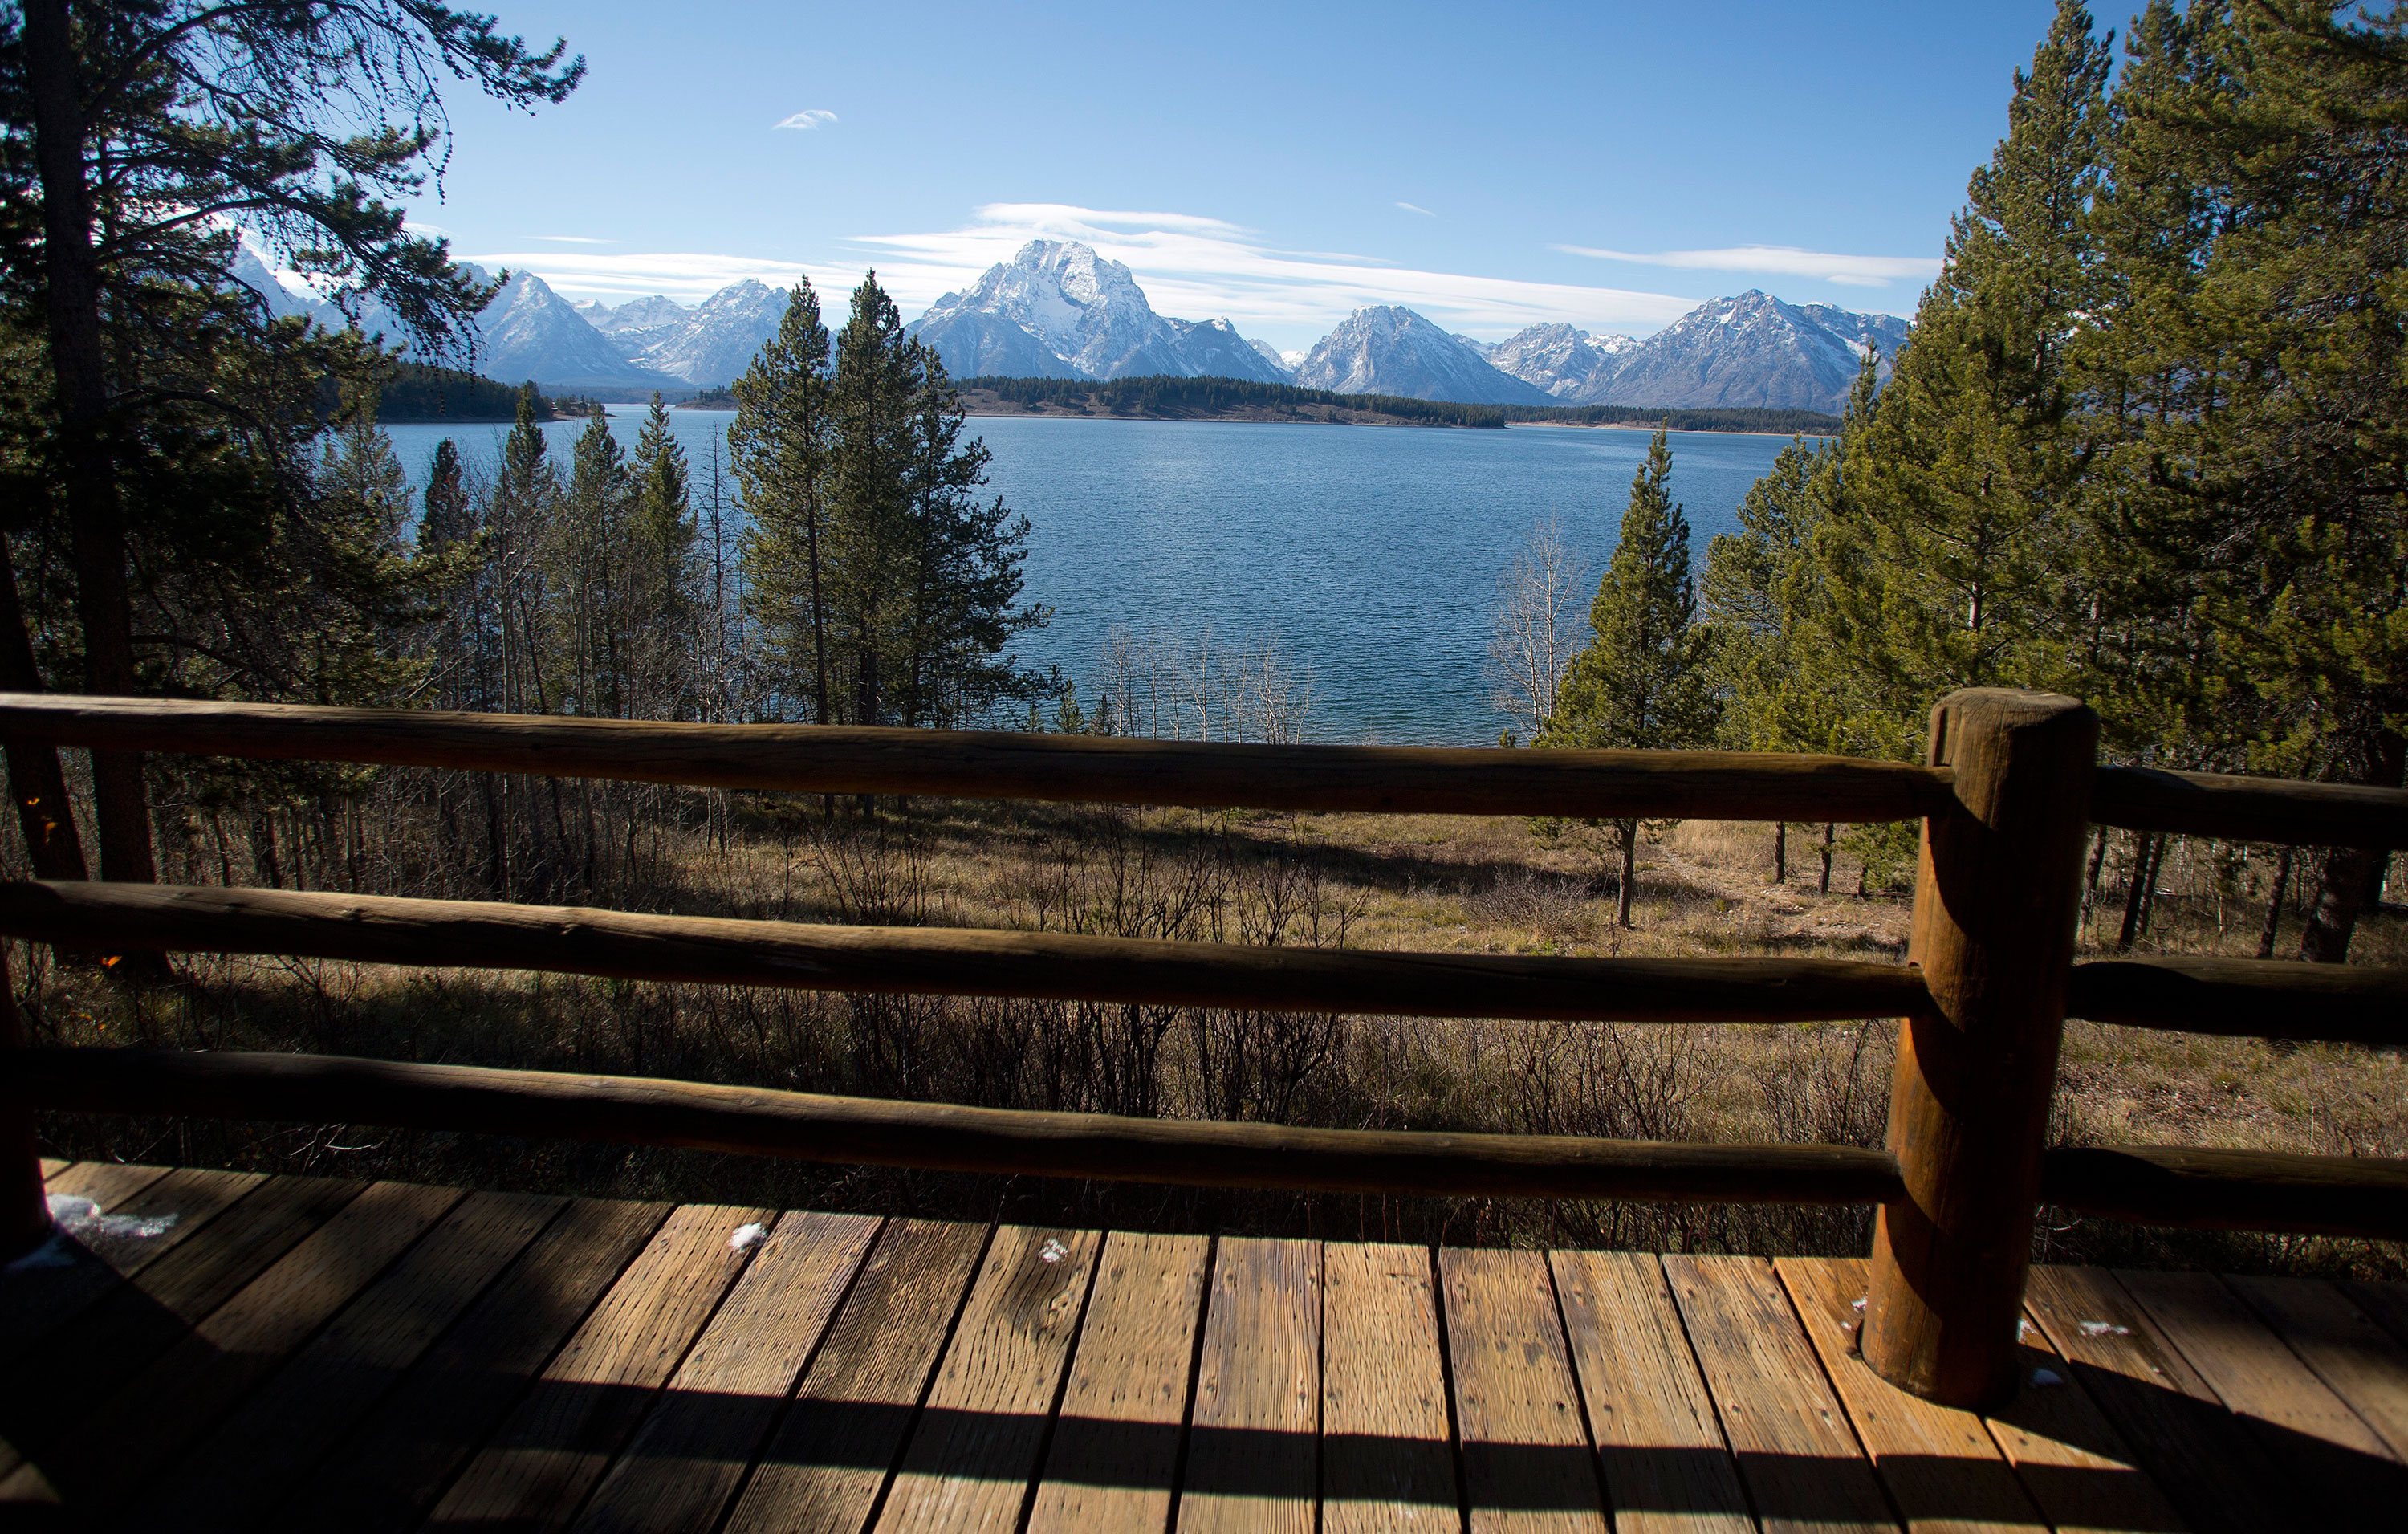 The deck of the Brinkerhoff overlooks Wyoming’s Jackson Lake (Jim Urquhart for Time)